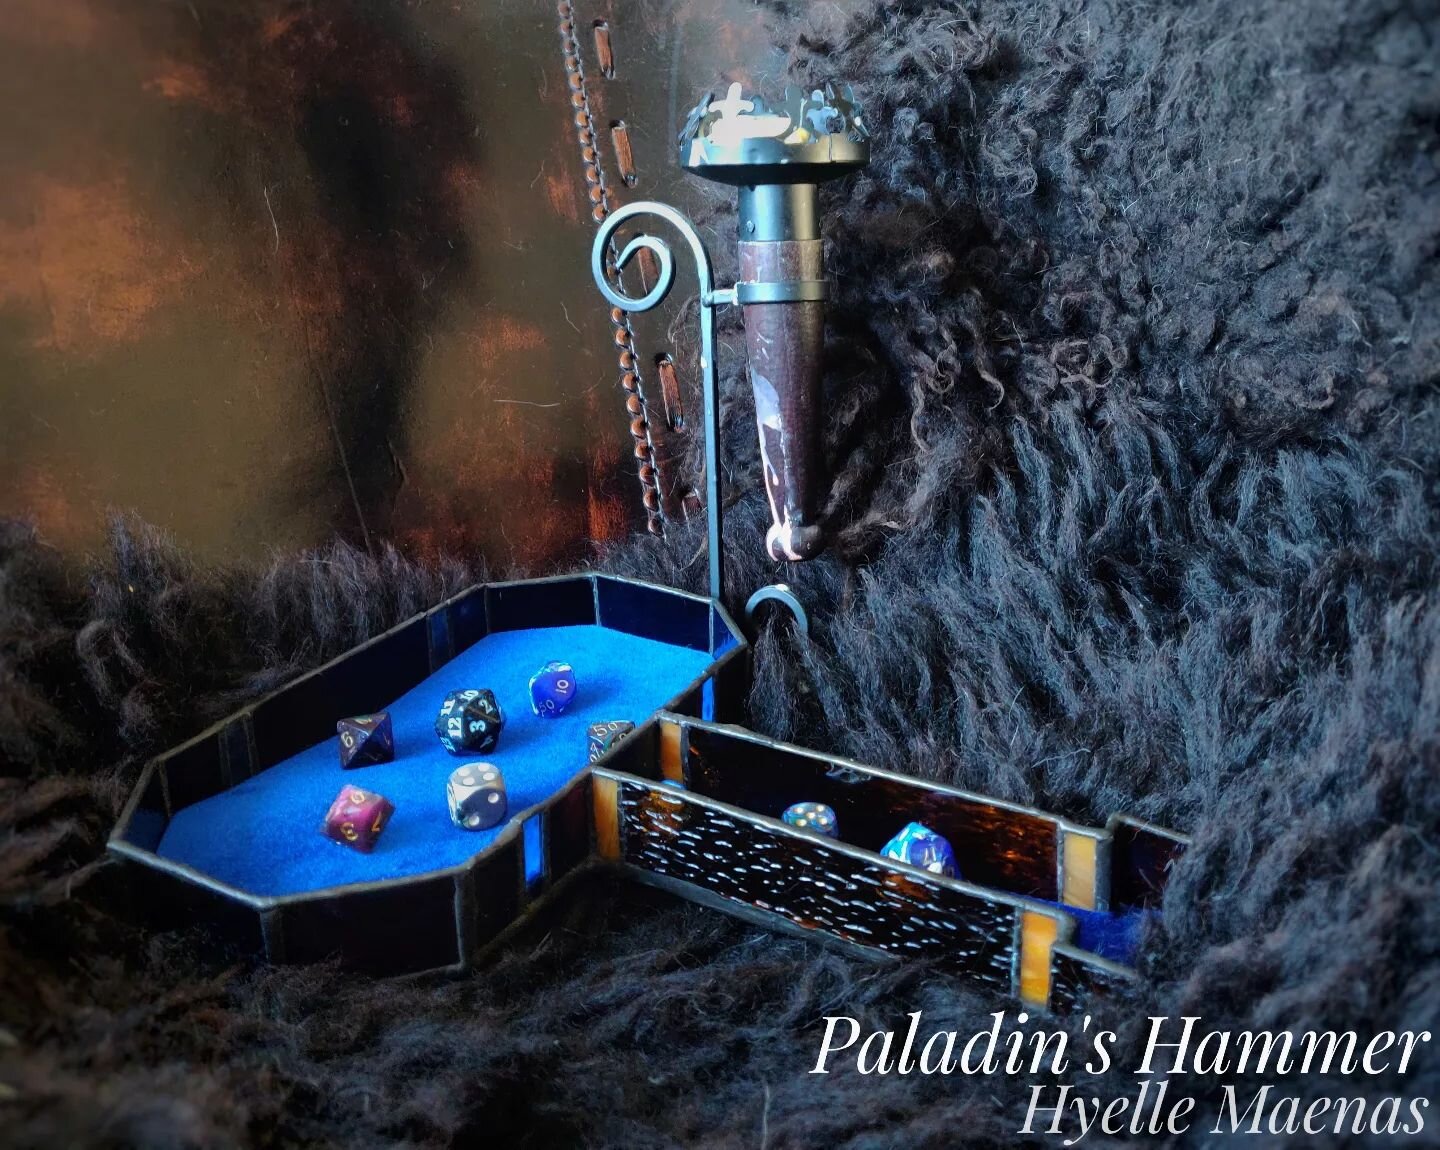 🛡️⚒️ The Paladin's Hammer ⚒️🛡️

Are you ready to swear your oath with the Paladin's Hammer at your side?

After designing the Druidcraft dicetray and the Paladin's Hammer.. maybe a line of dicetrays based on the D&amp;D classes would be a cool next